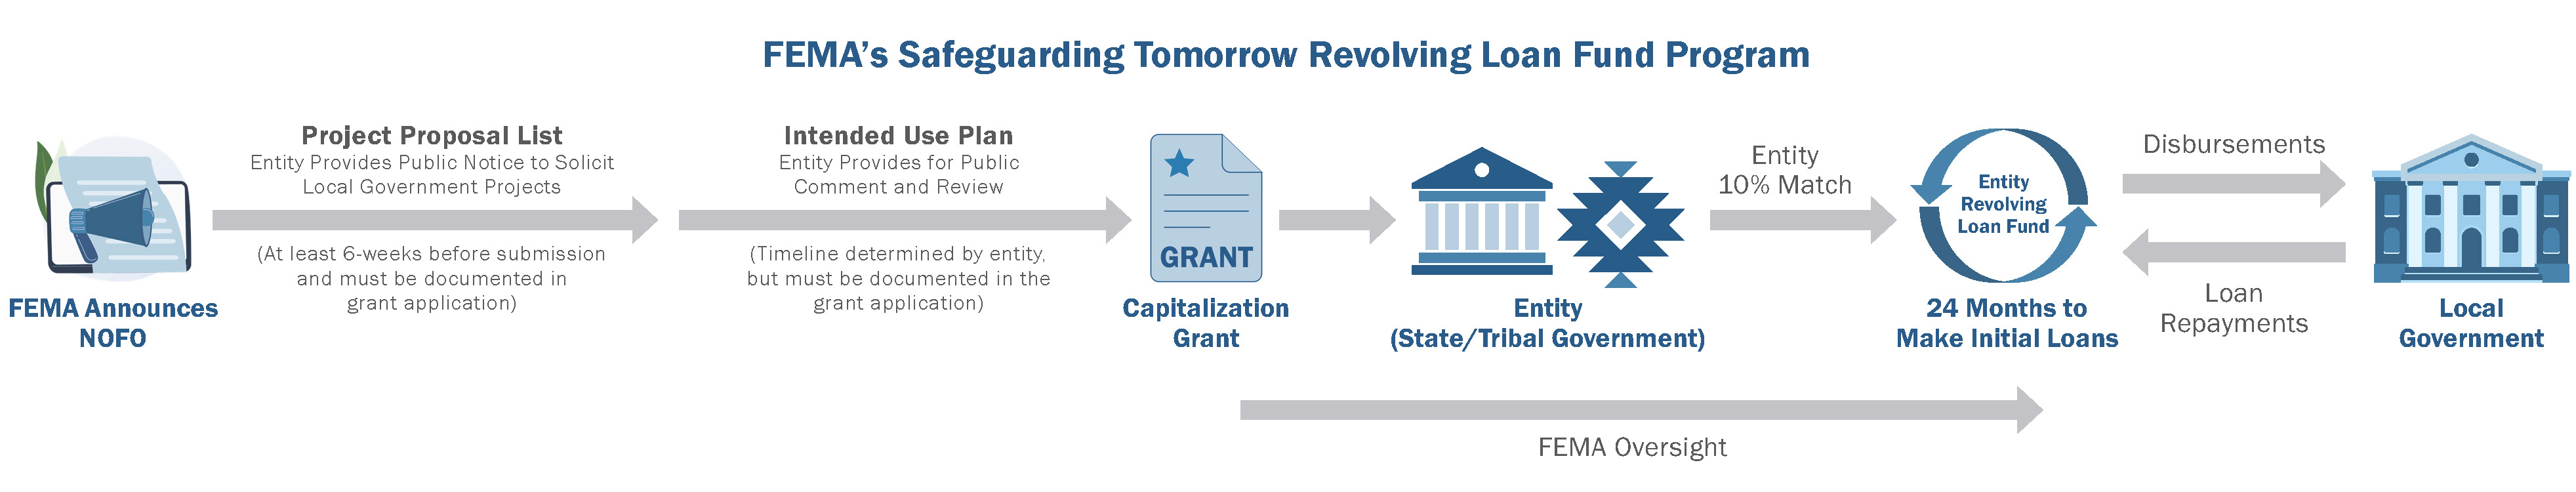 This graphic shows the process of applying for the STORM Revolving Loan Fund program. The key timepoints are FEMA announces the NOFO, the capitalization grant is made, the entity has 24 months to make the initial loans, and the local government and state/tribal government then take control of the process.